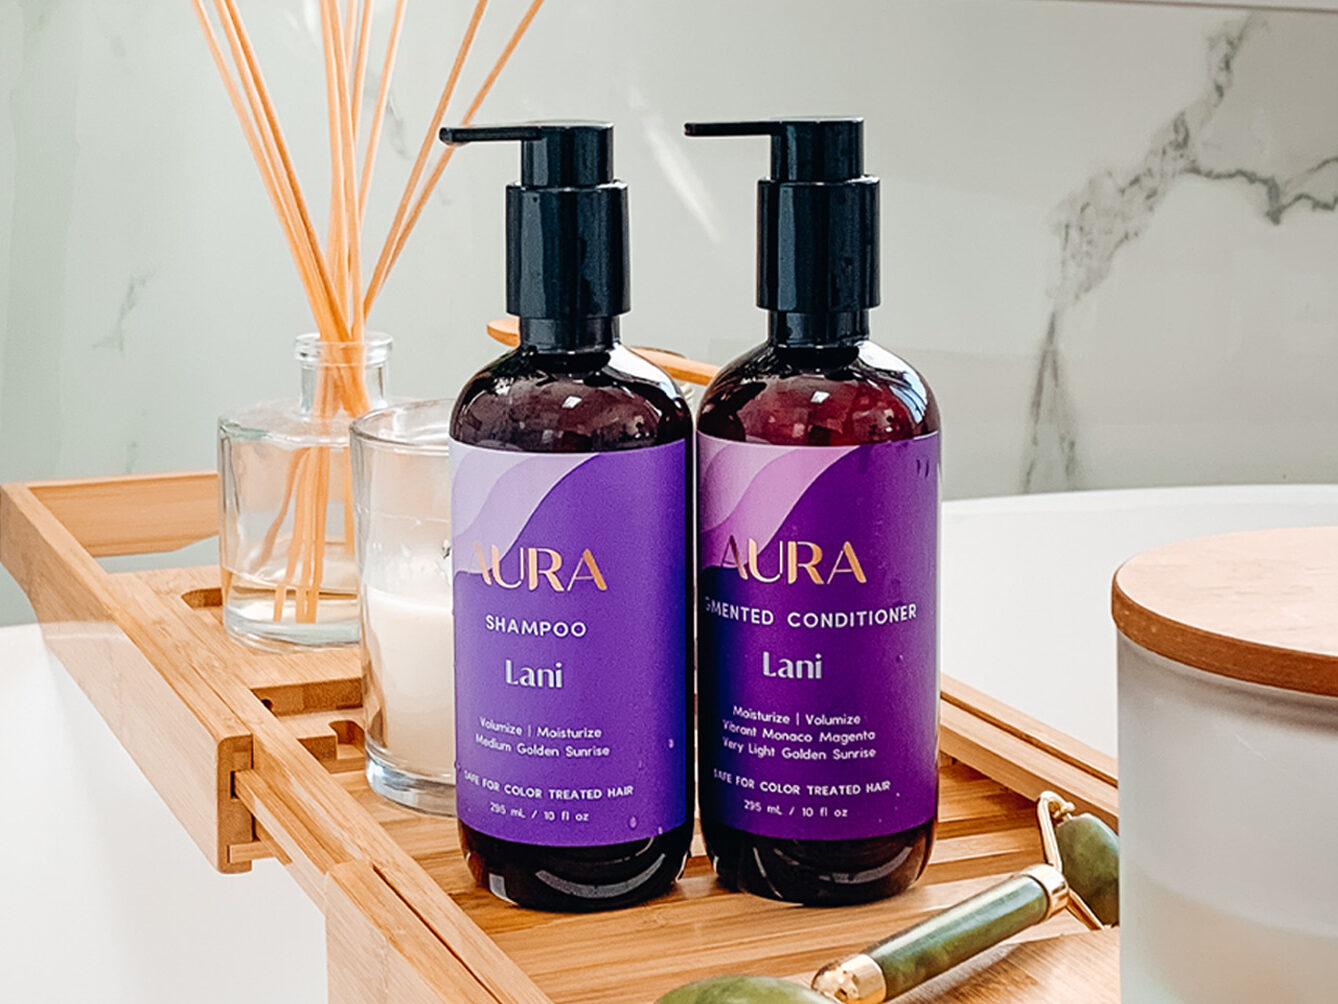 Your Valentine’s Day Self Care Ritual with AURA